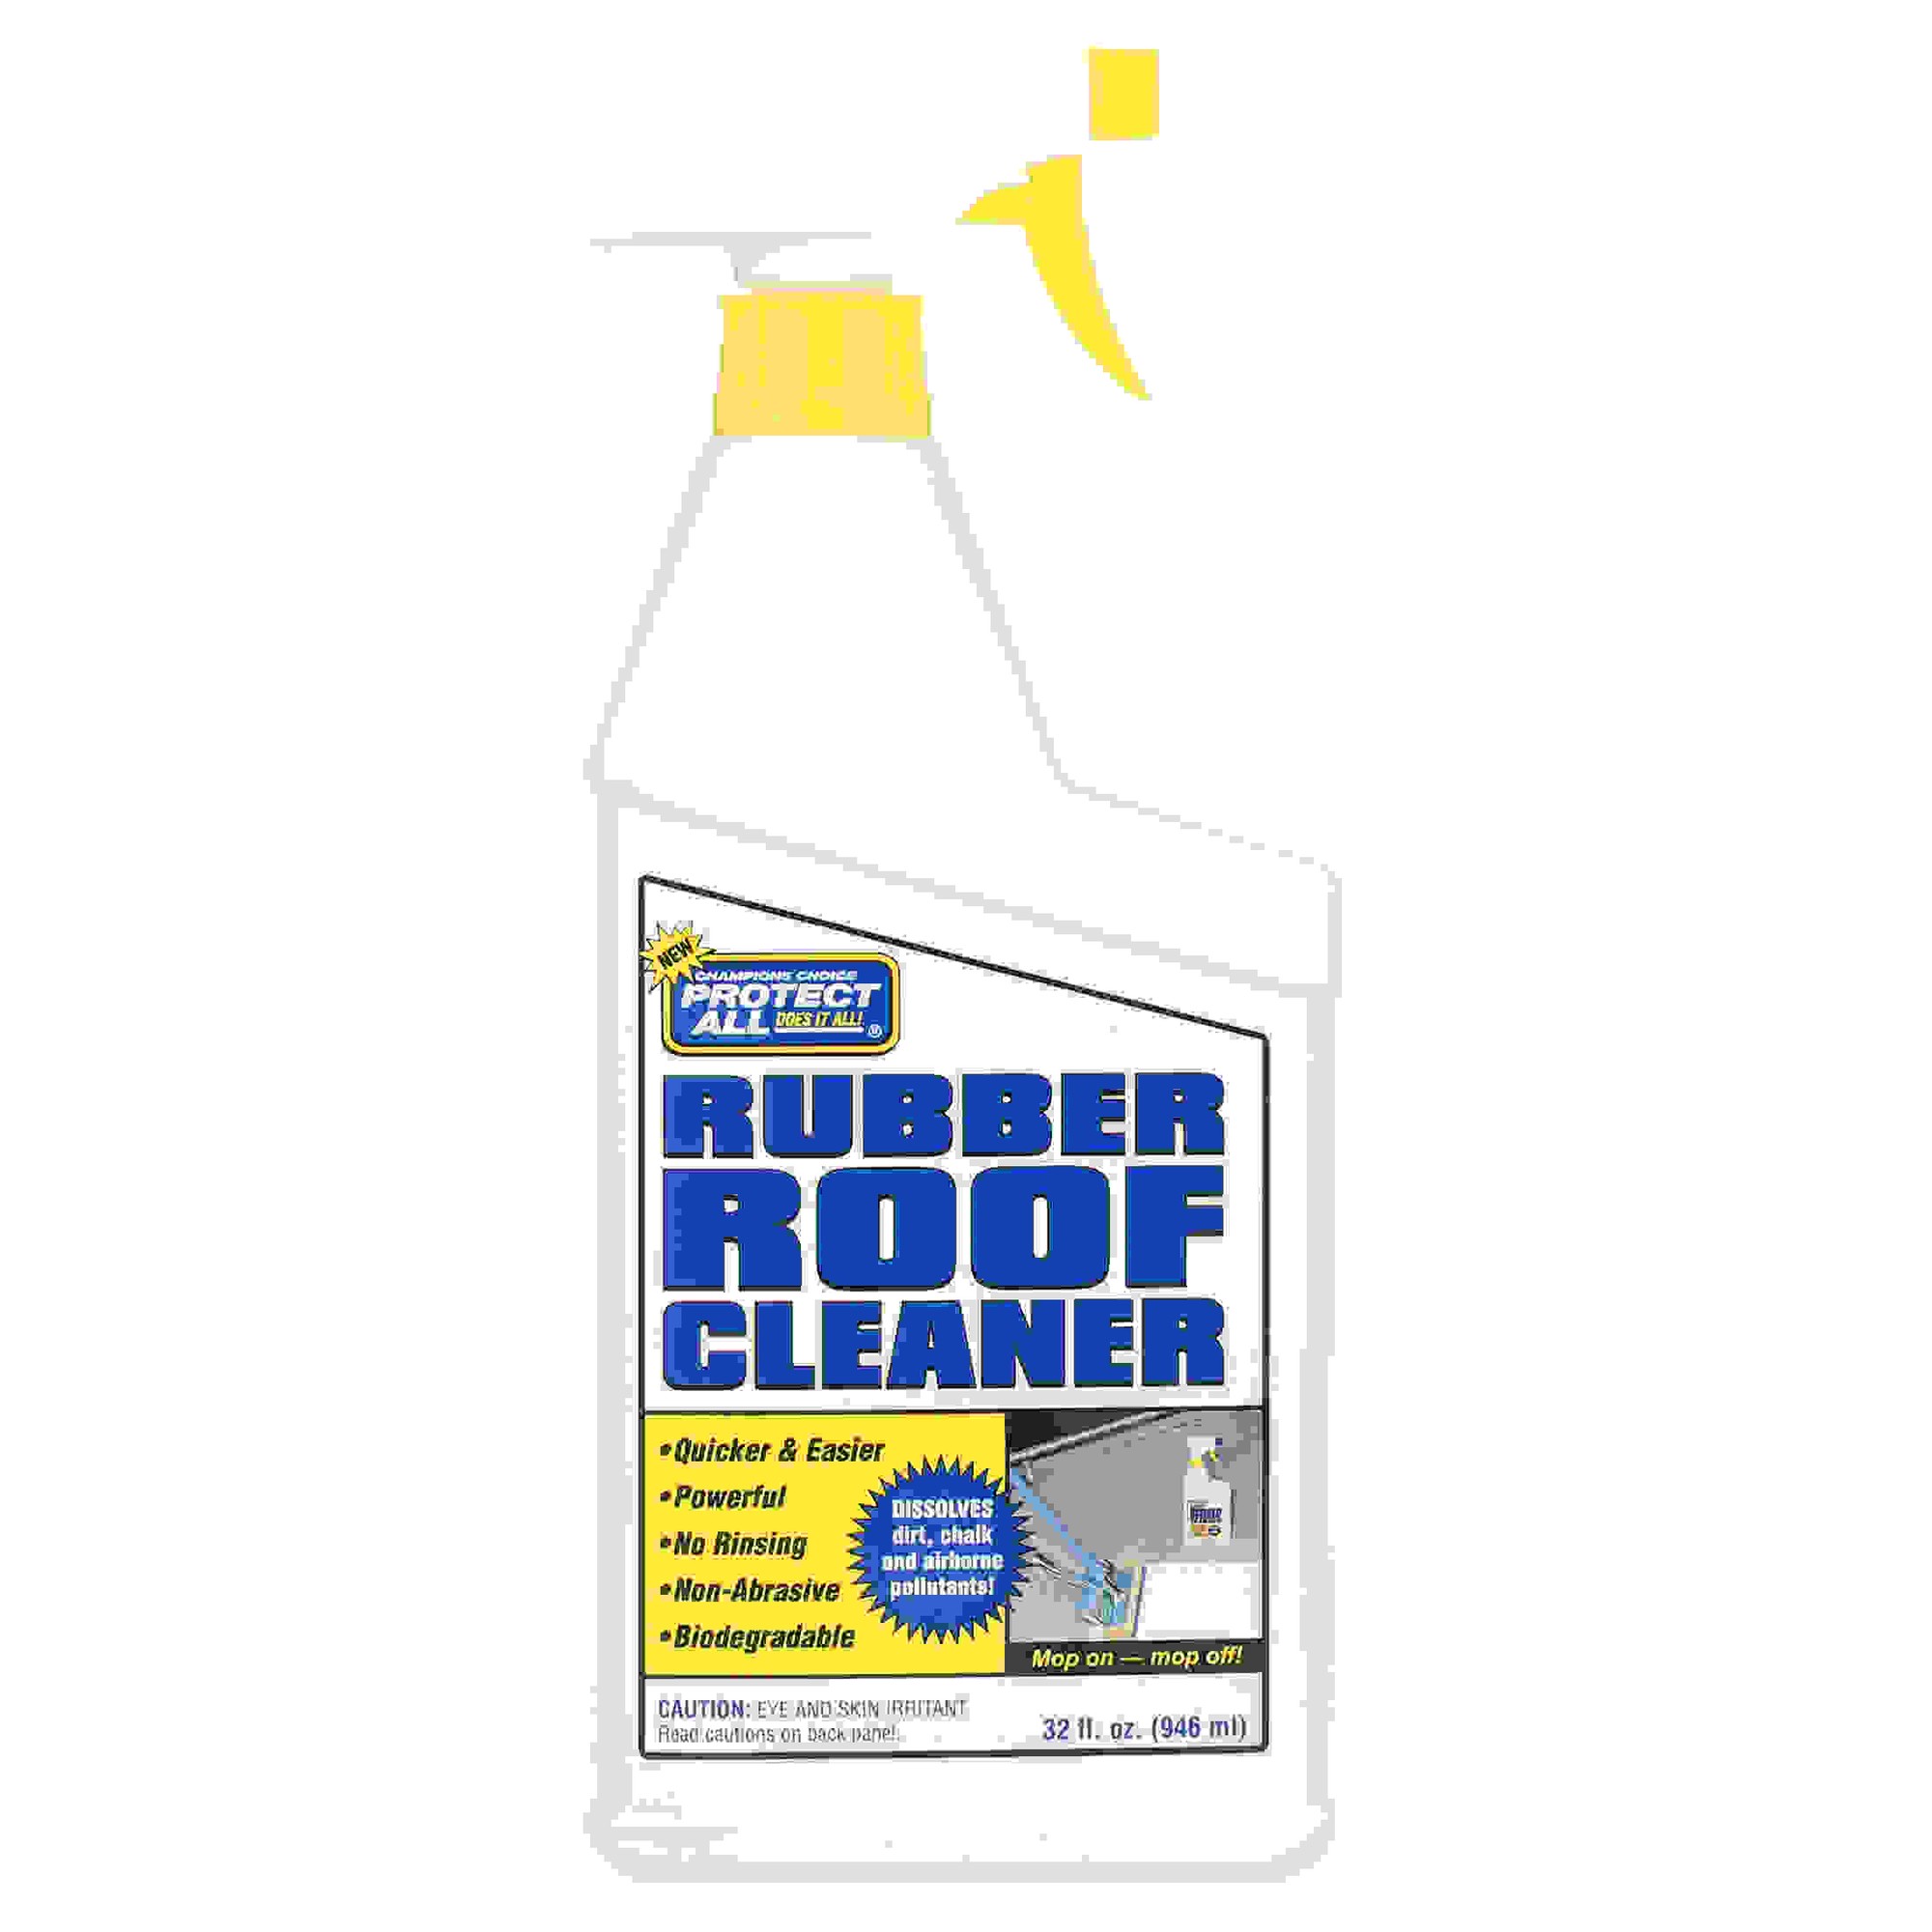 Rv Rubber Roof Cleaner, 32 Oz